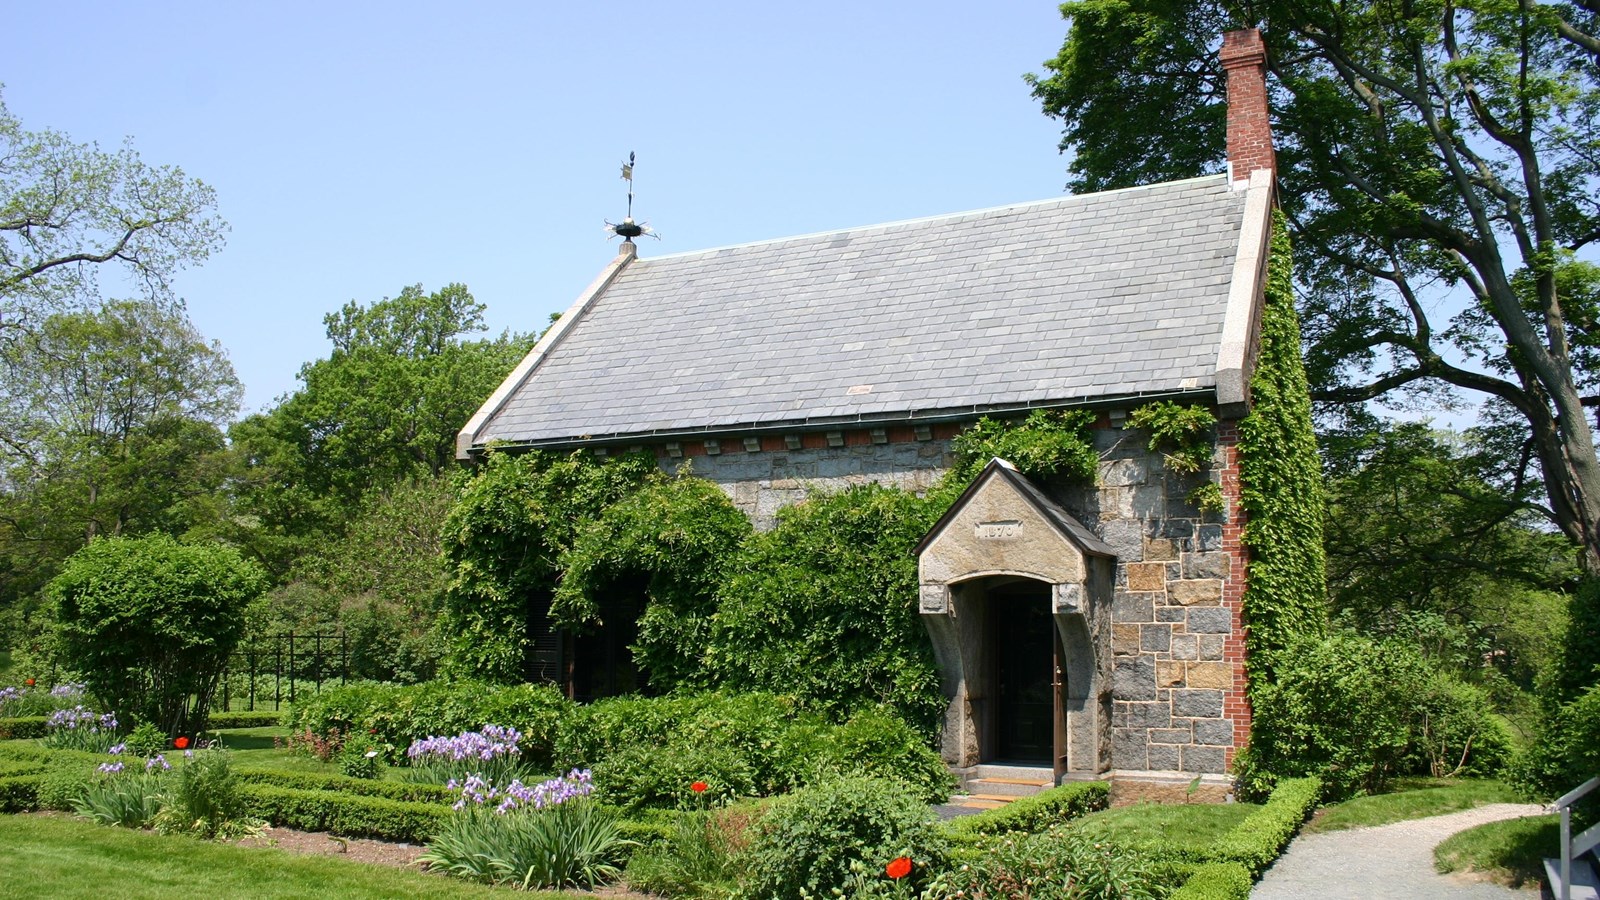 A stone and brick building with a chimney and weathervane.  Wisteria vines climb up the sides.